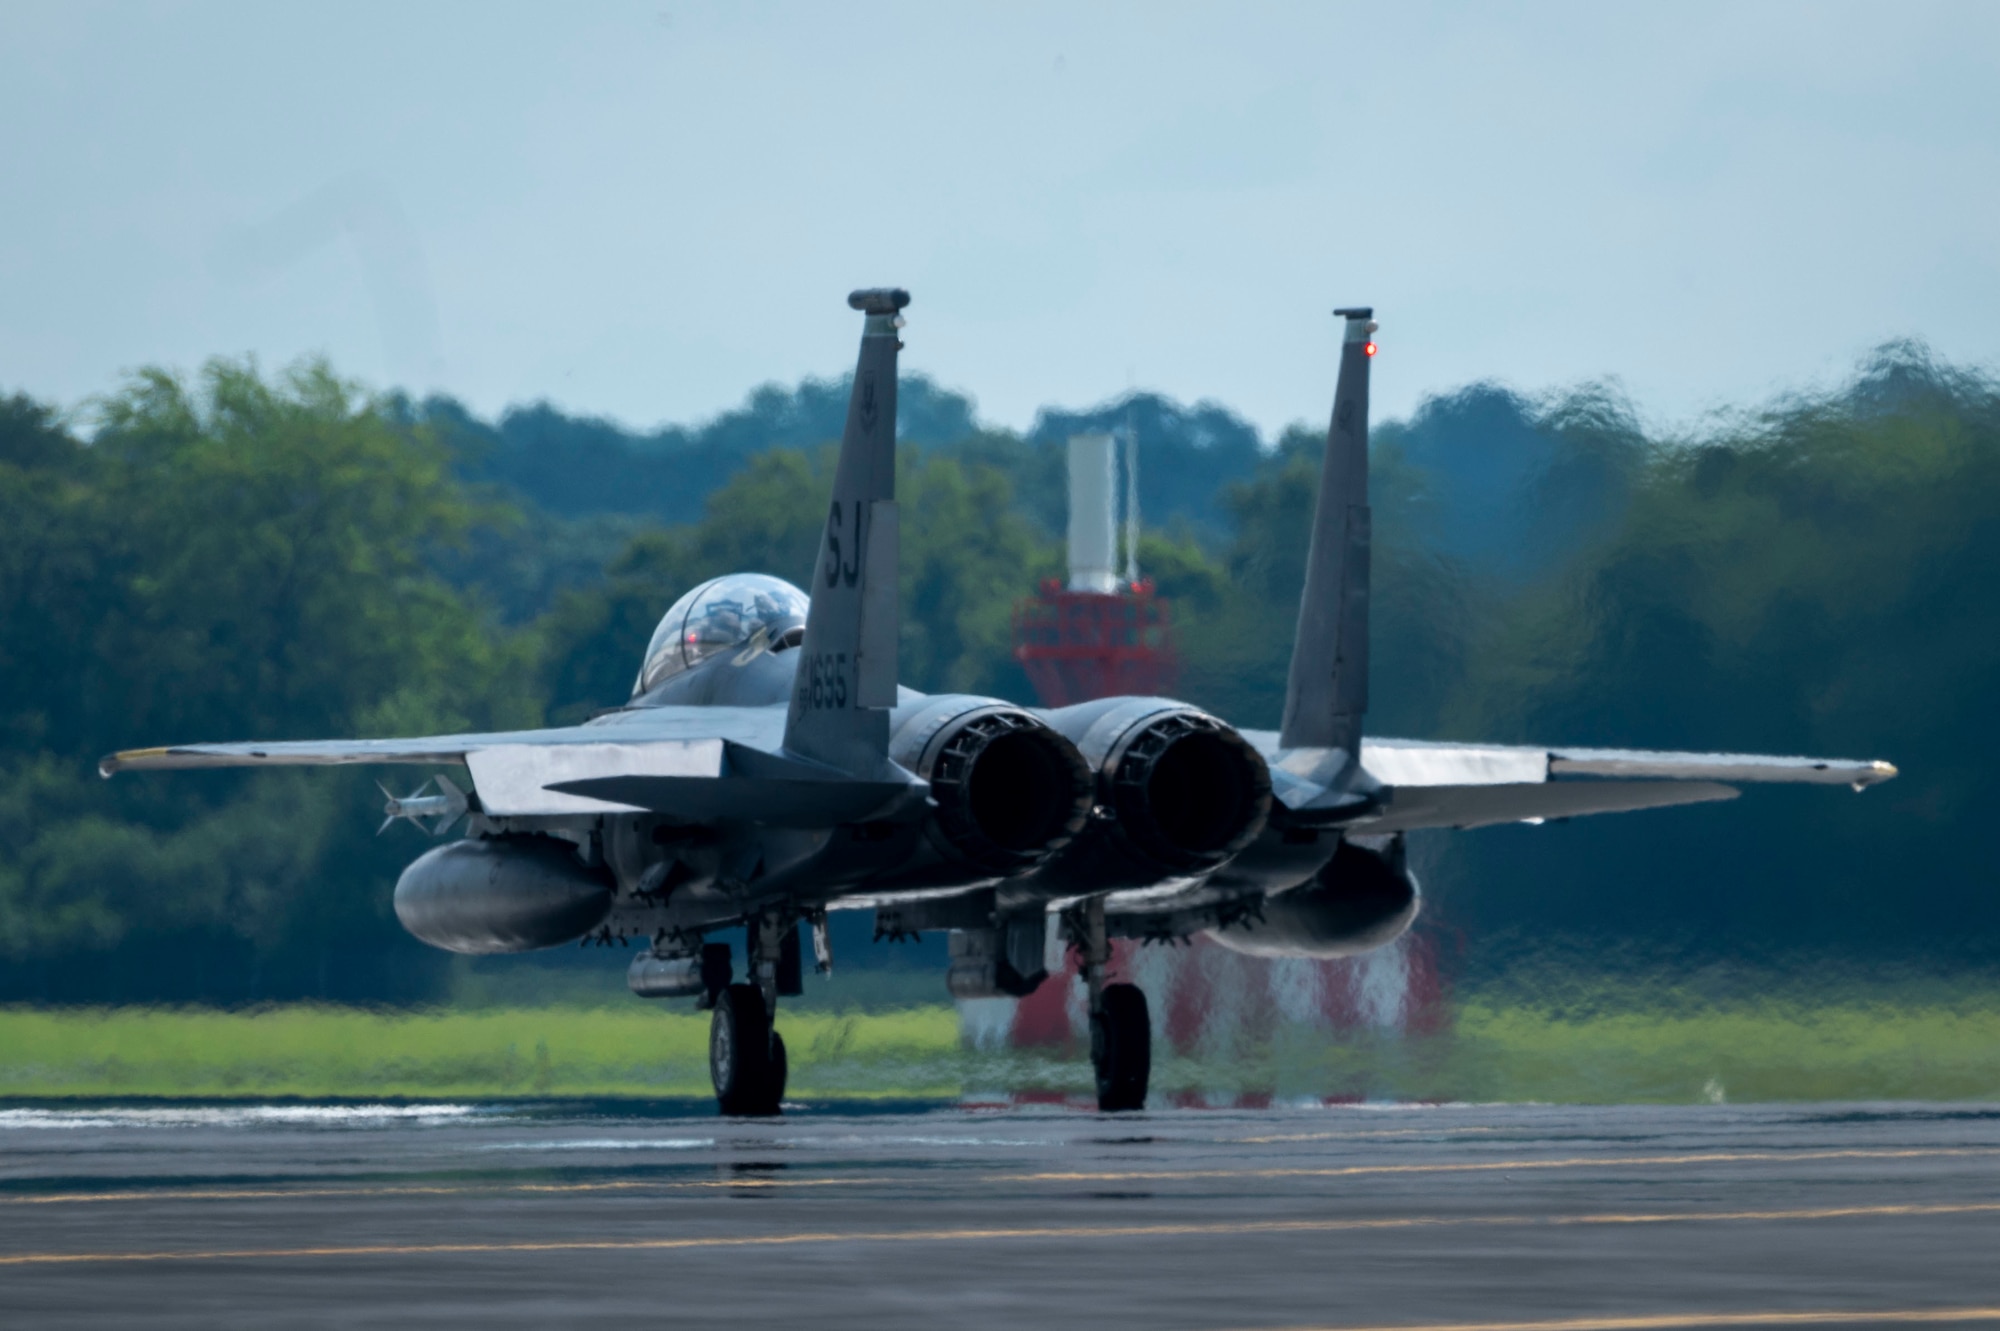 An F-15E Strike Eagle from the 335th Fighter Squadron prepares to take off at Seymour Johnson Air Force Base, North Carolina, Aug. 9, 2021.